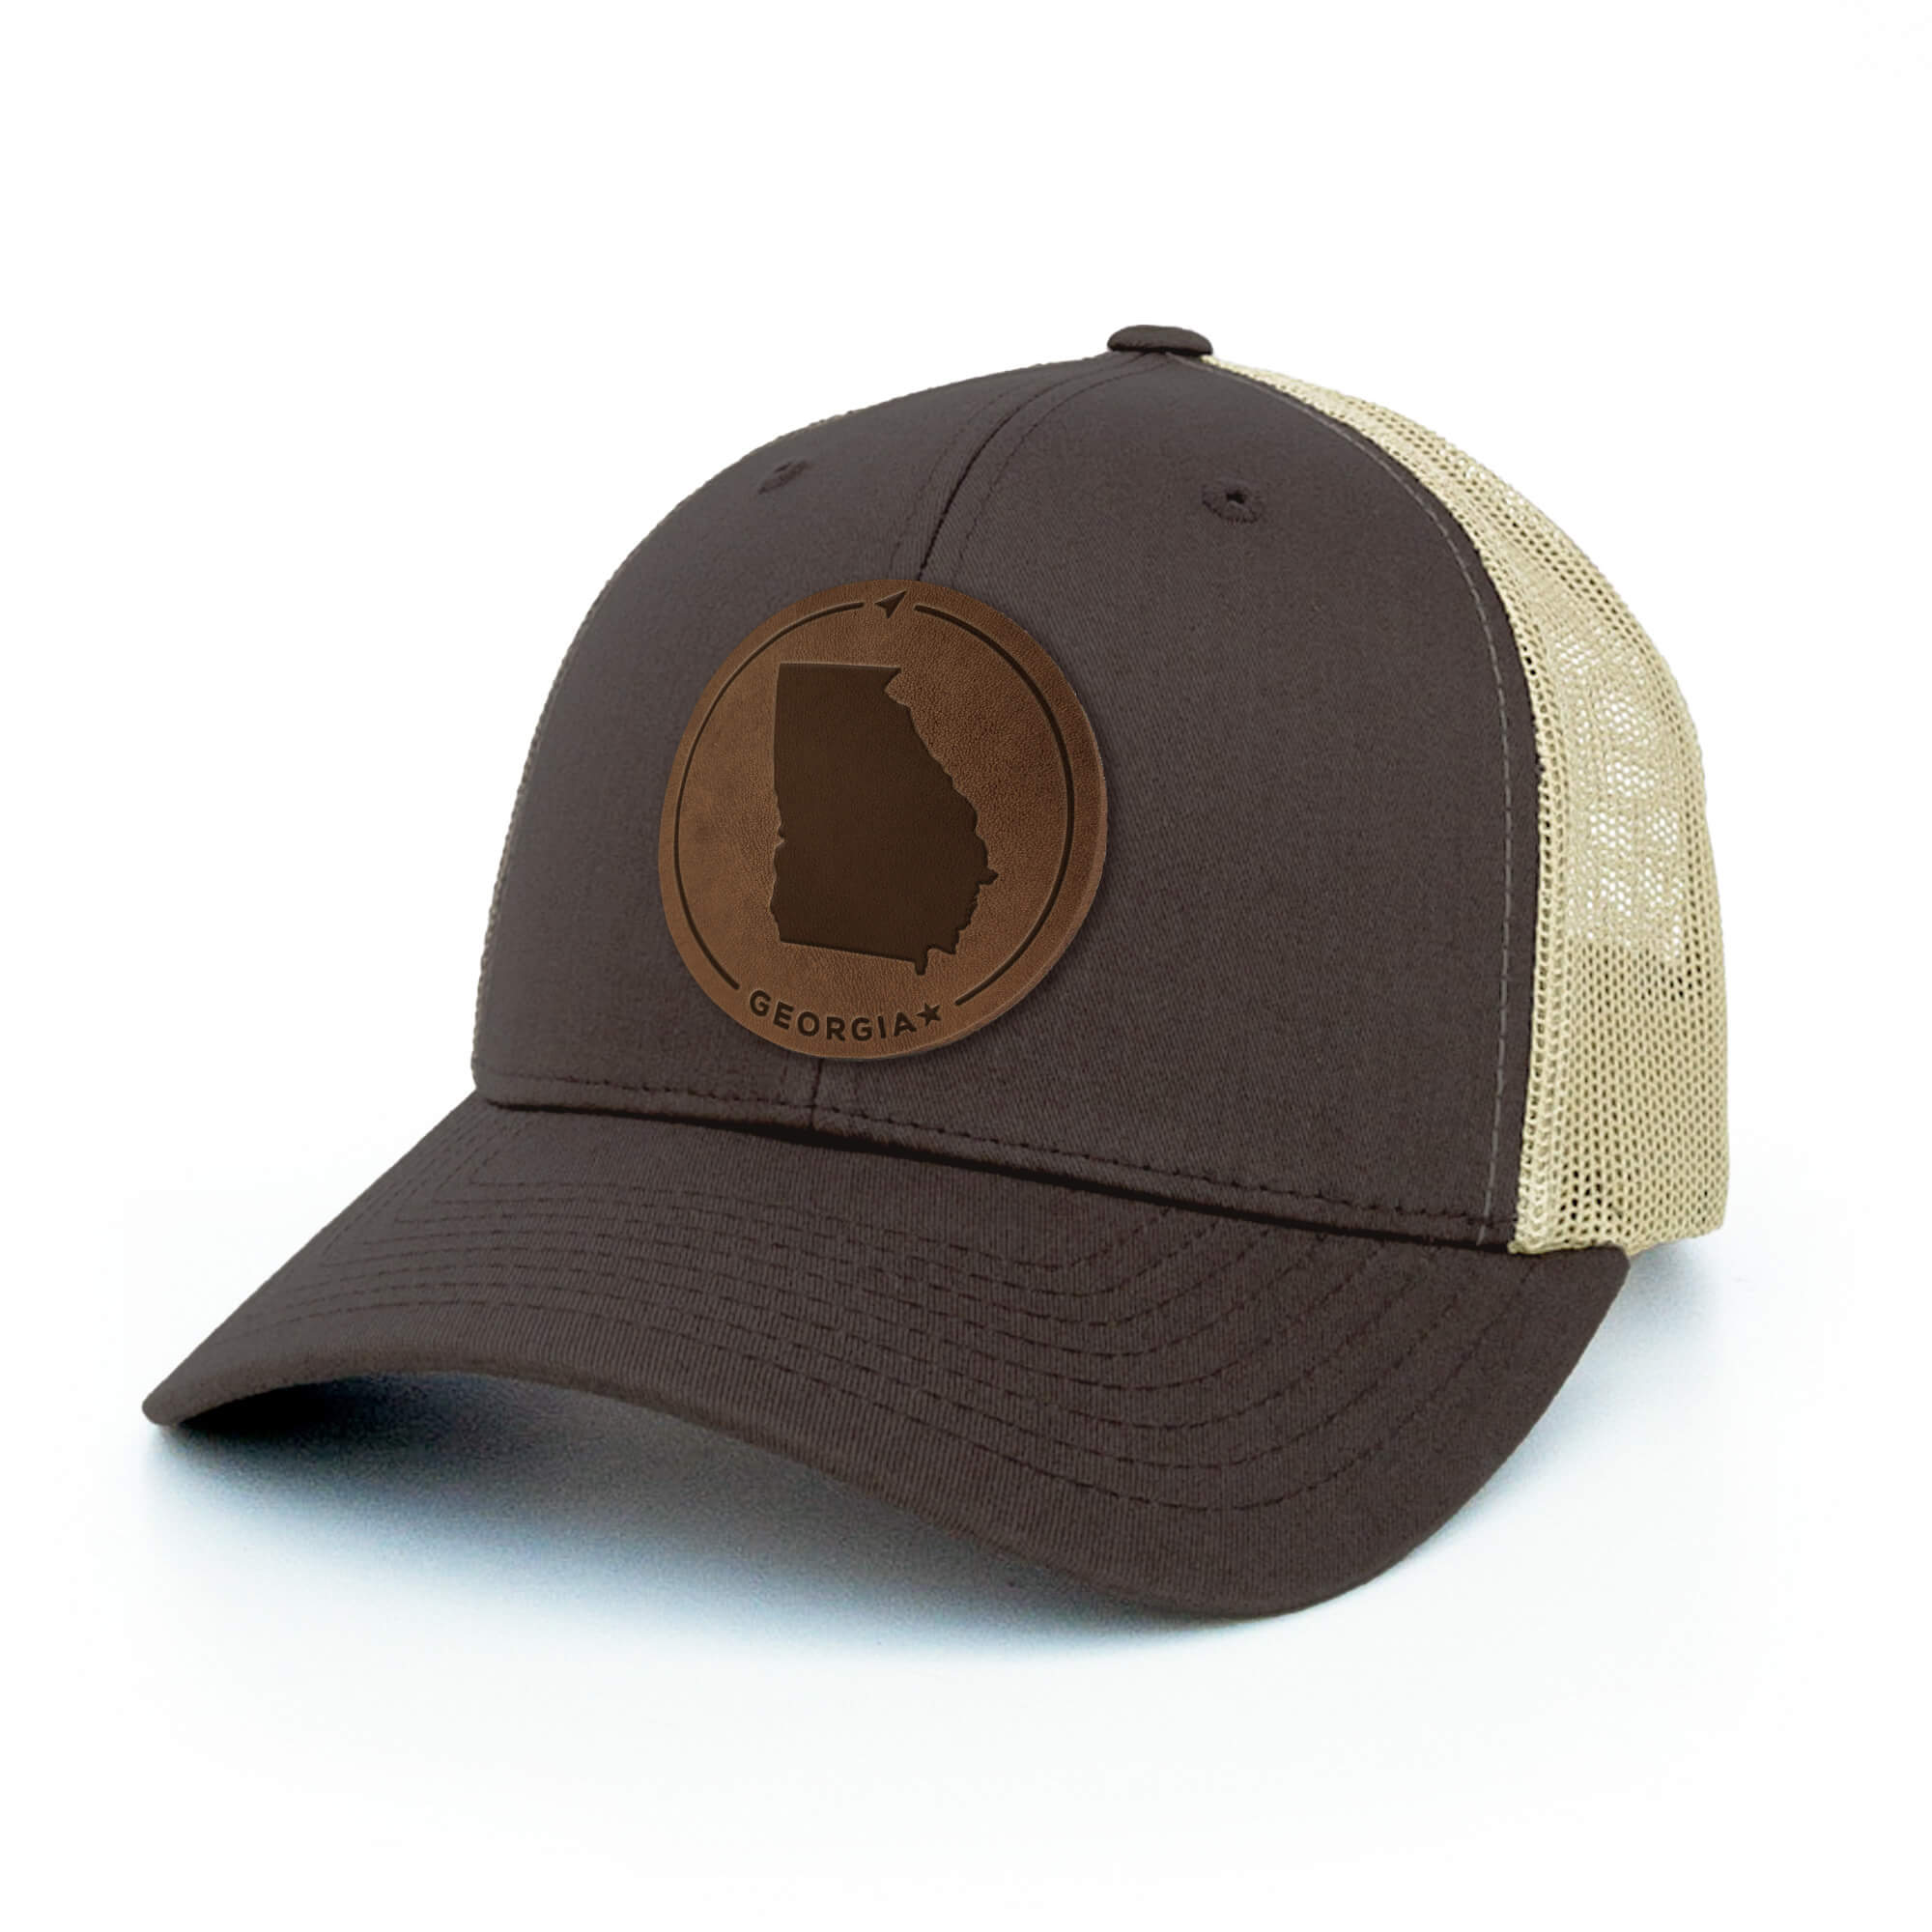 Brown and khaki trucker hat with full-grain leather patch of Georgia | BLACK-003-009, CHARC-003-009, NAVY-003-009, HGREY-003-009, MOSS-003-009, BROWN-003-009